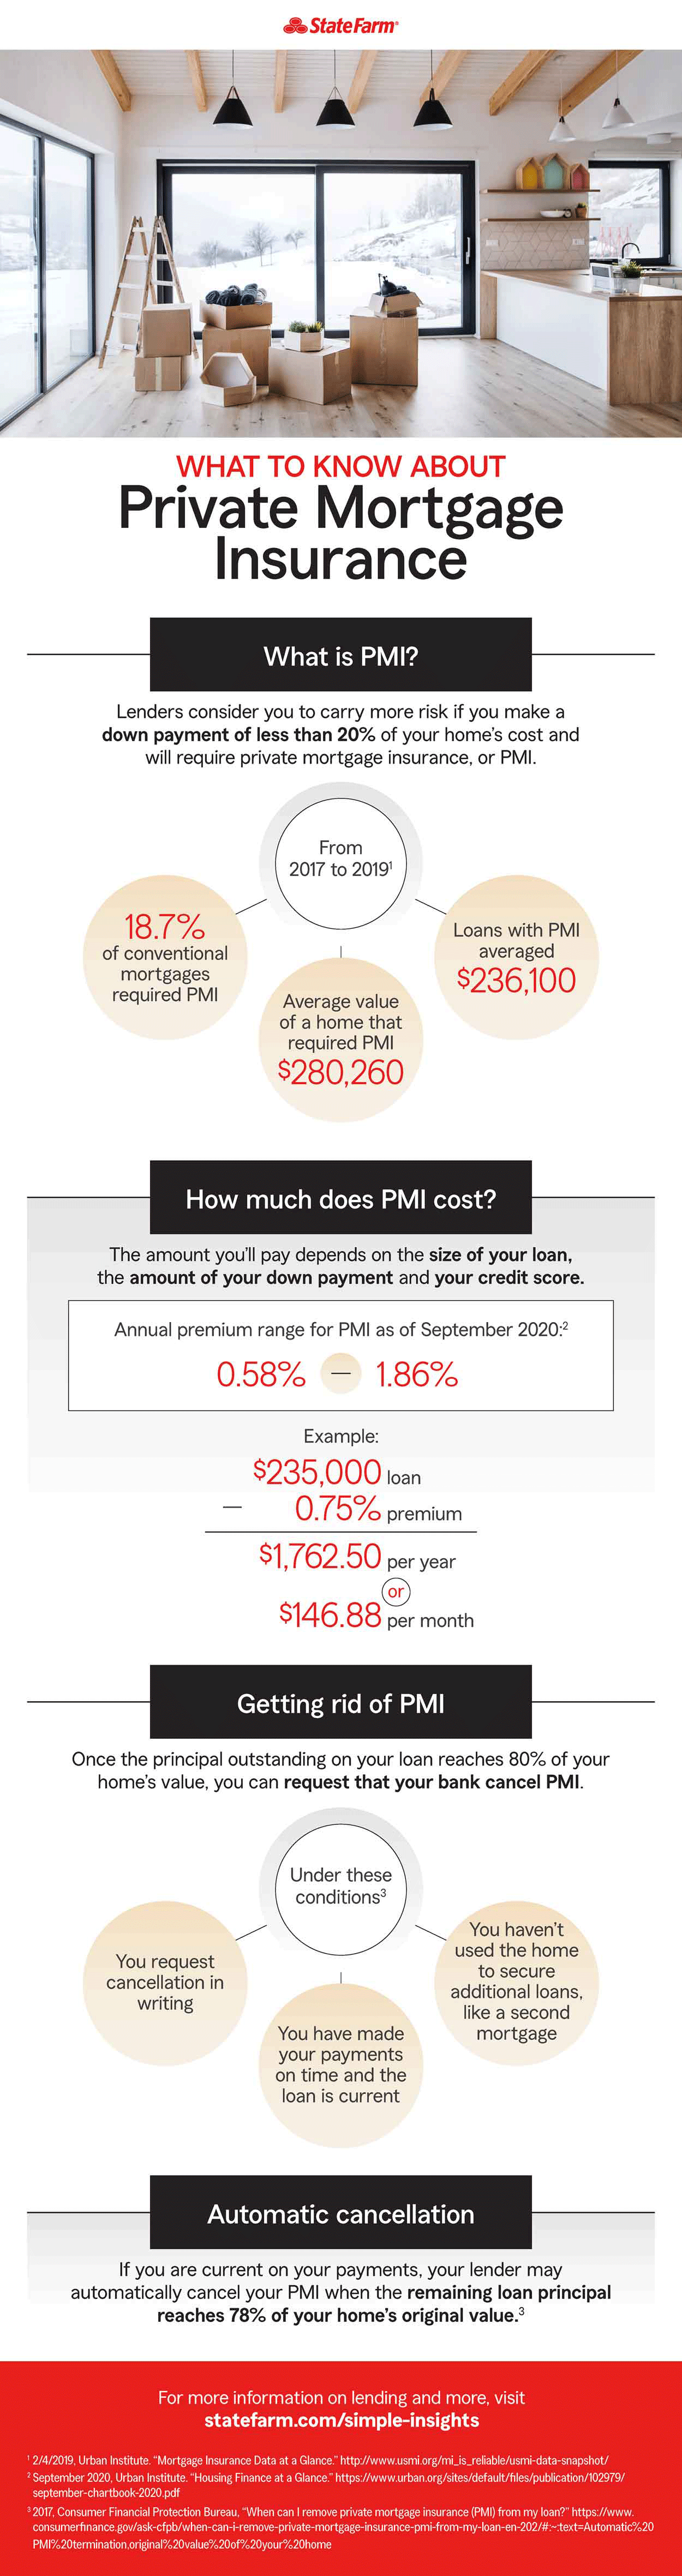 Infographic - Private Mortgage Insurance